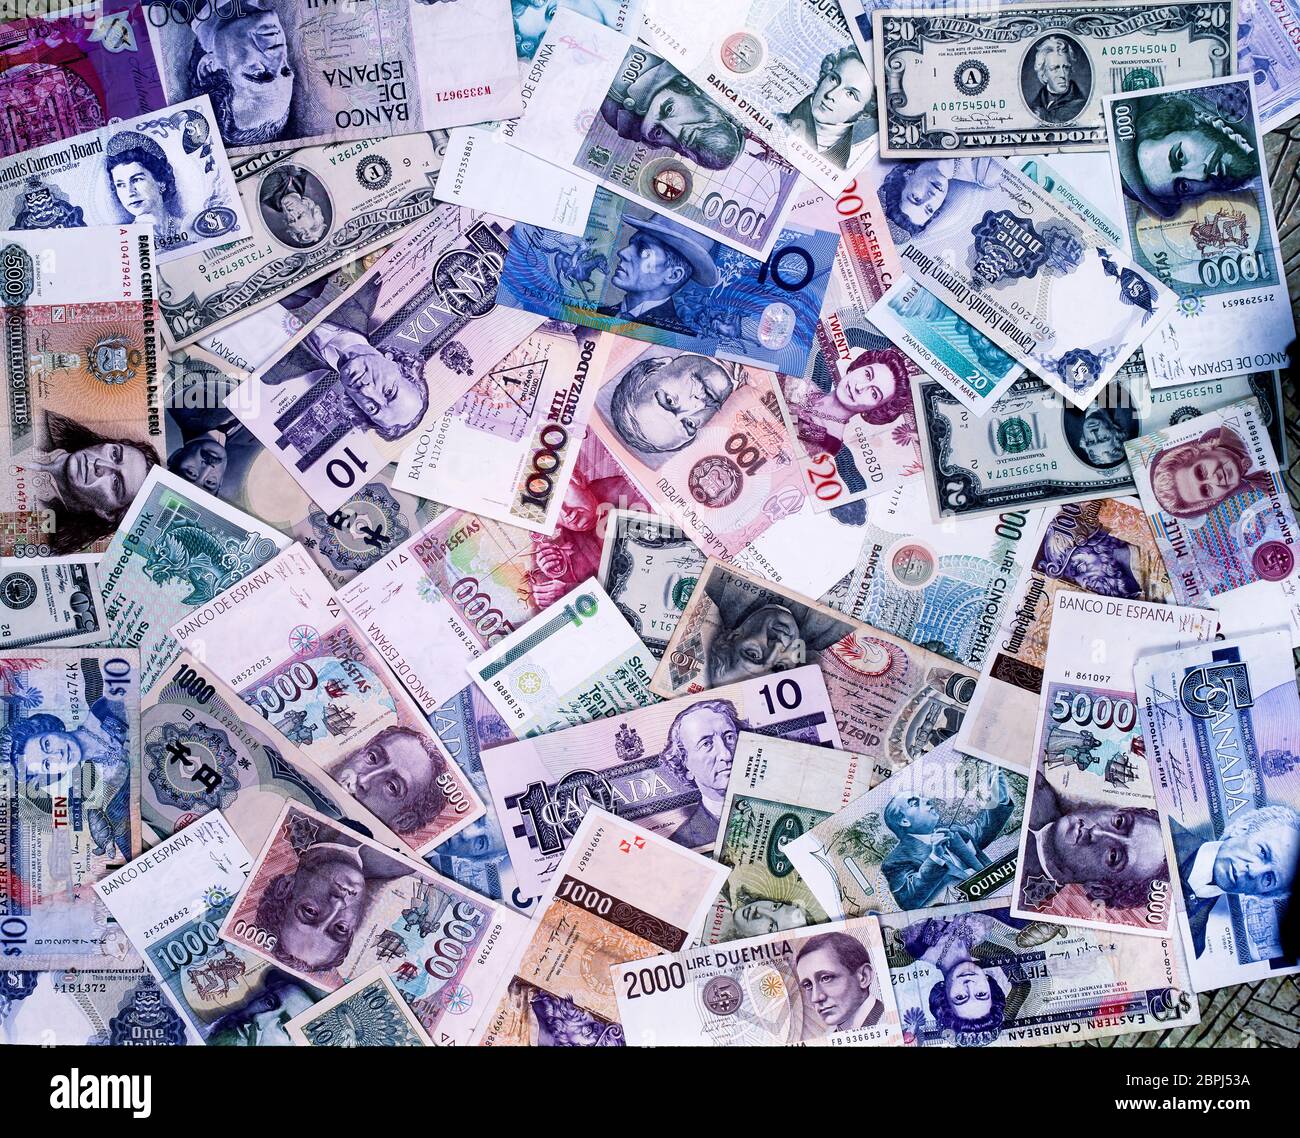 Paper currency from around the world Stock Photo